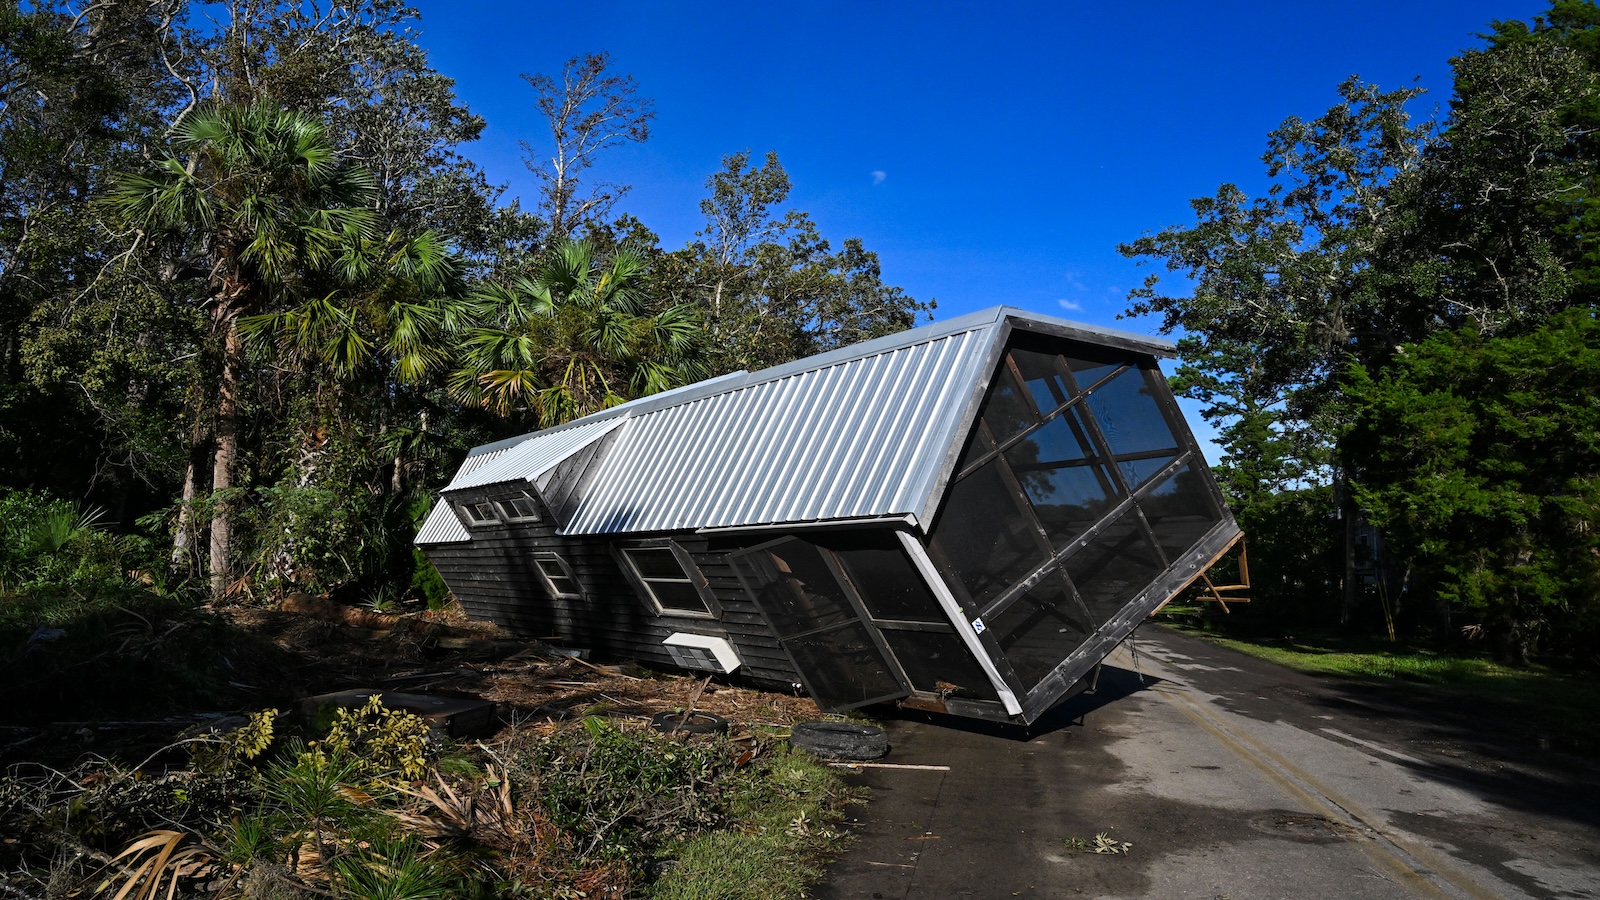 A mobile home lays flipped on its side after a hurricane